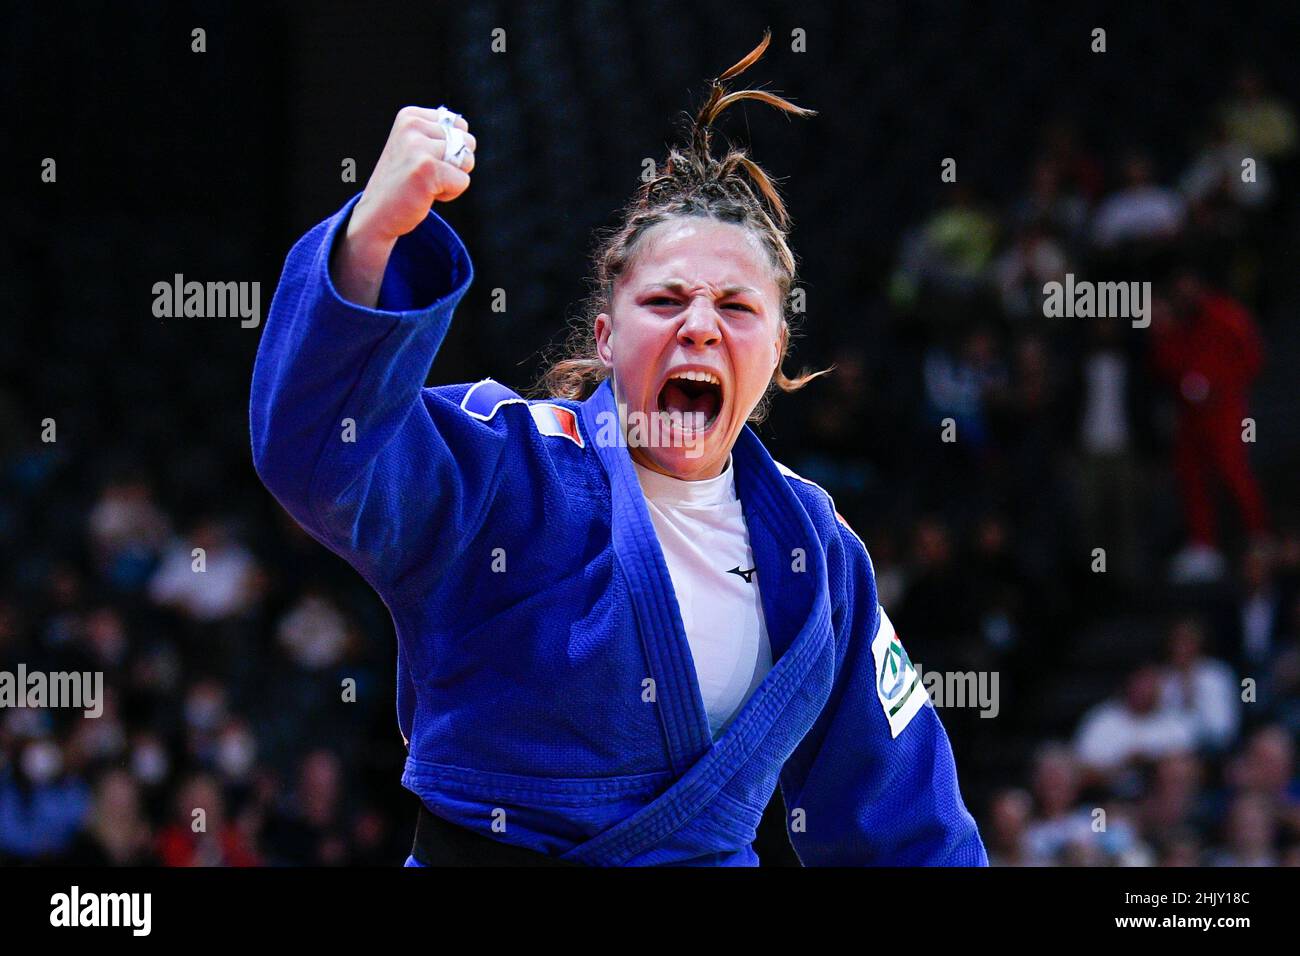 Women -63 kg, Manon DEKETER of France celebrates during the Paris Grand Slam 2021, Judo event on October 16, 2021 at AccorHotels Arena in Paris, Franc Stock Photo